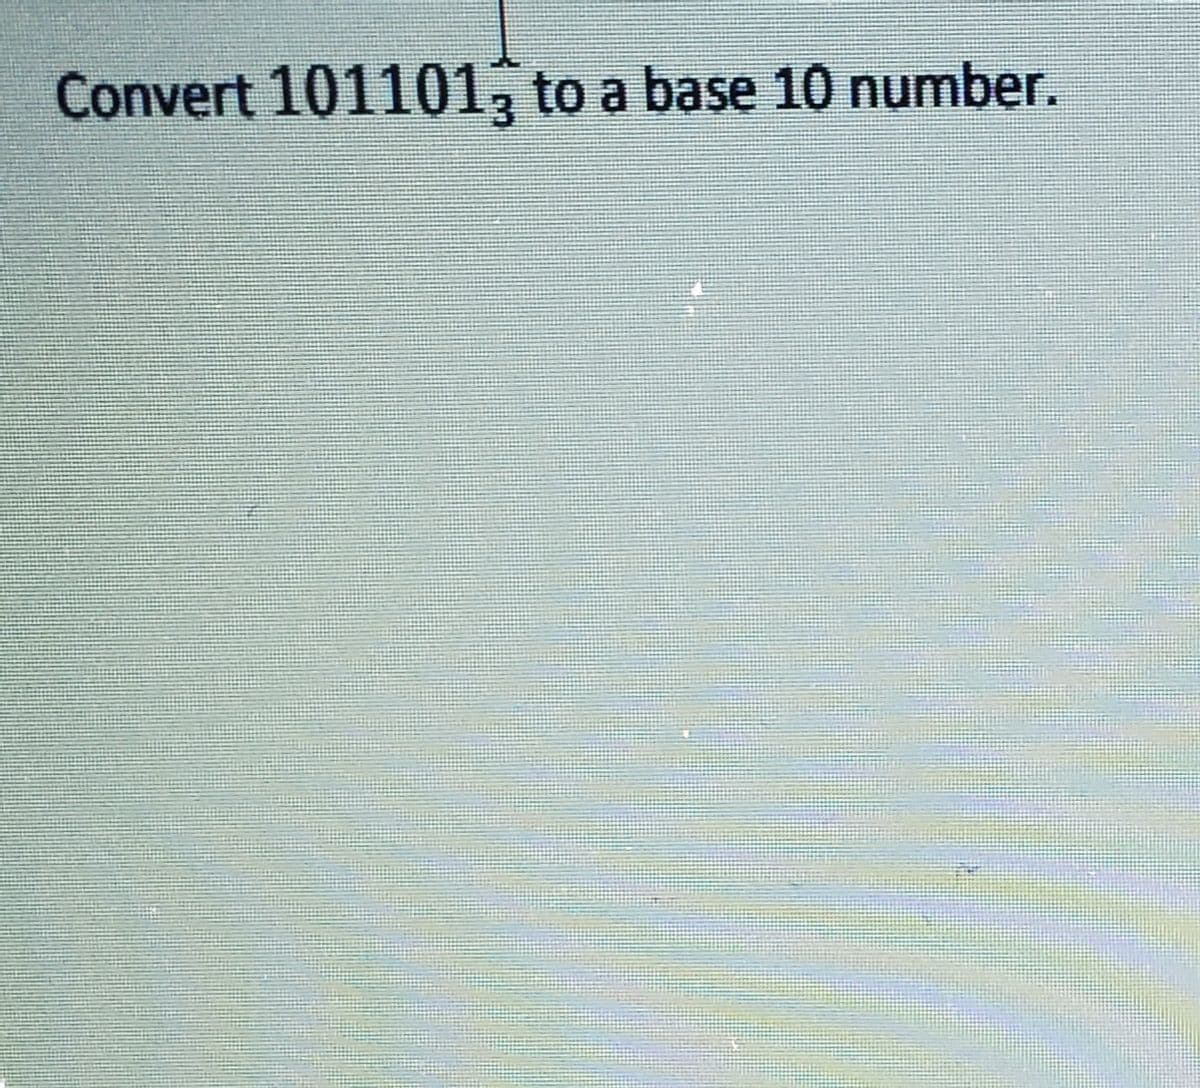 Convert 101101, to a base 10 number.
